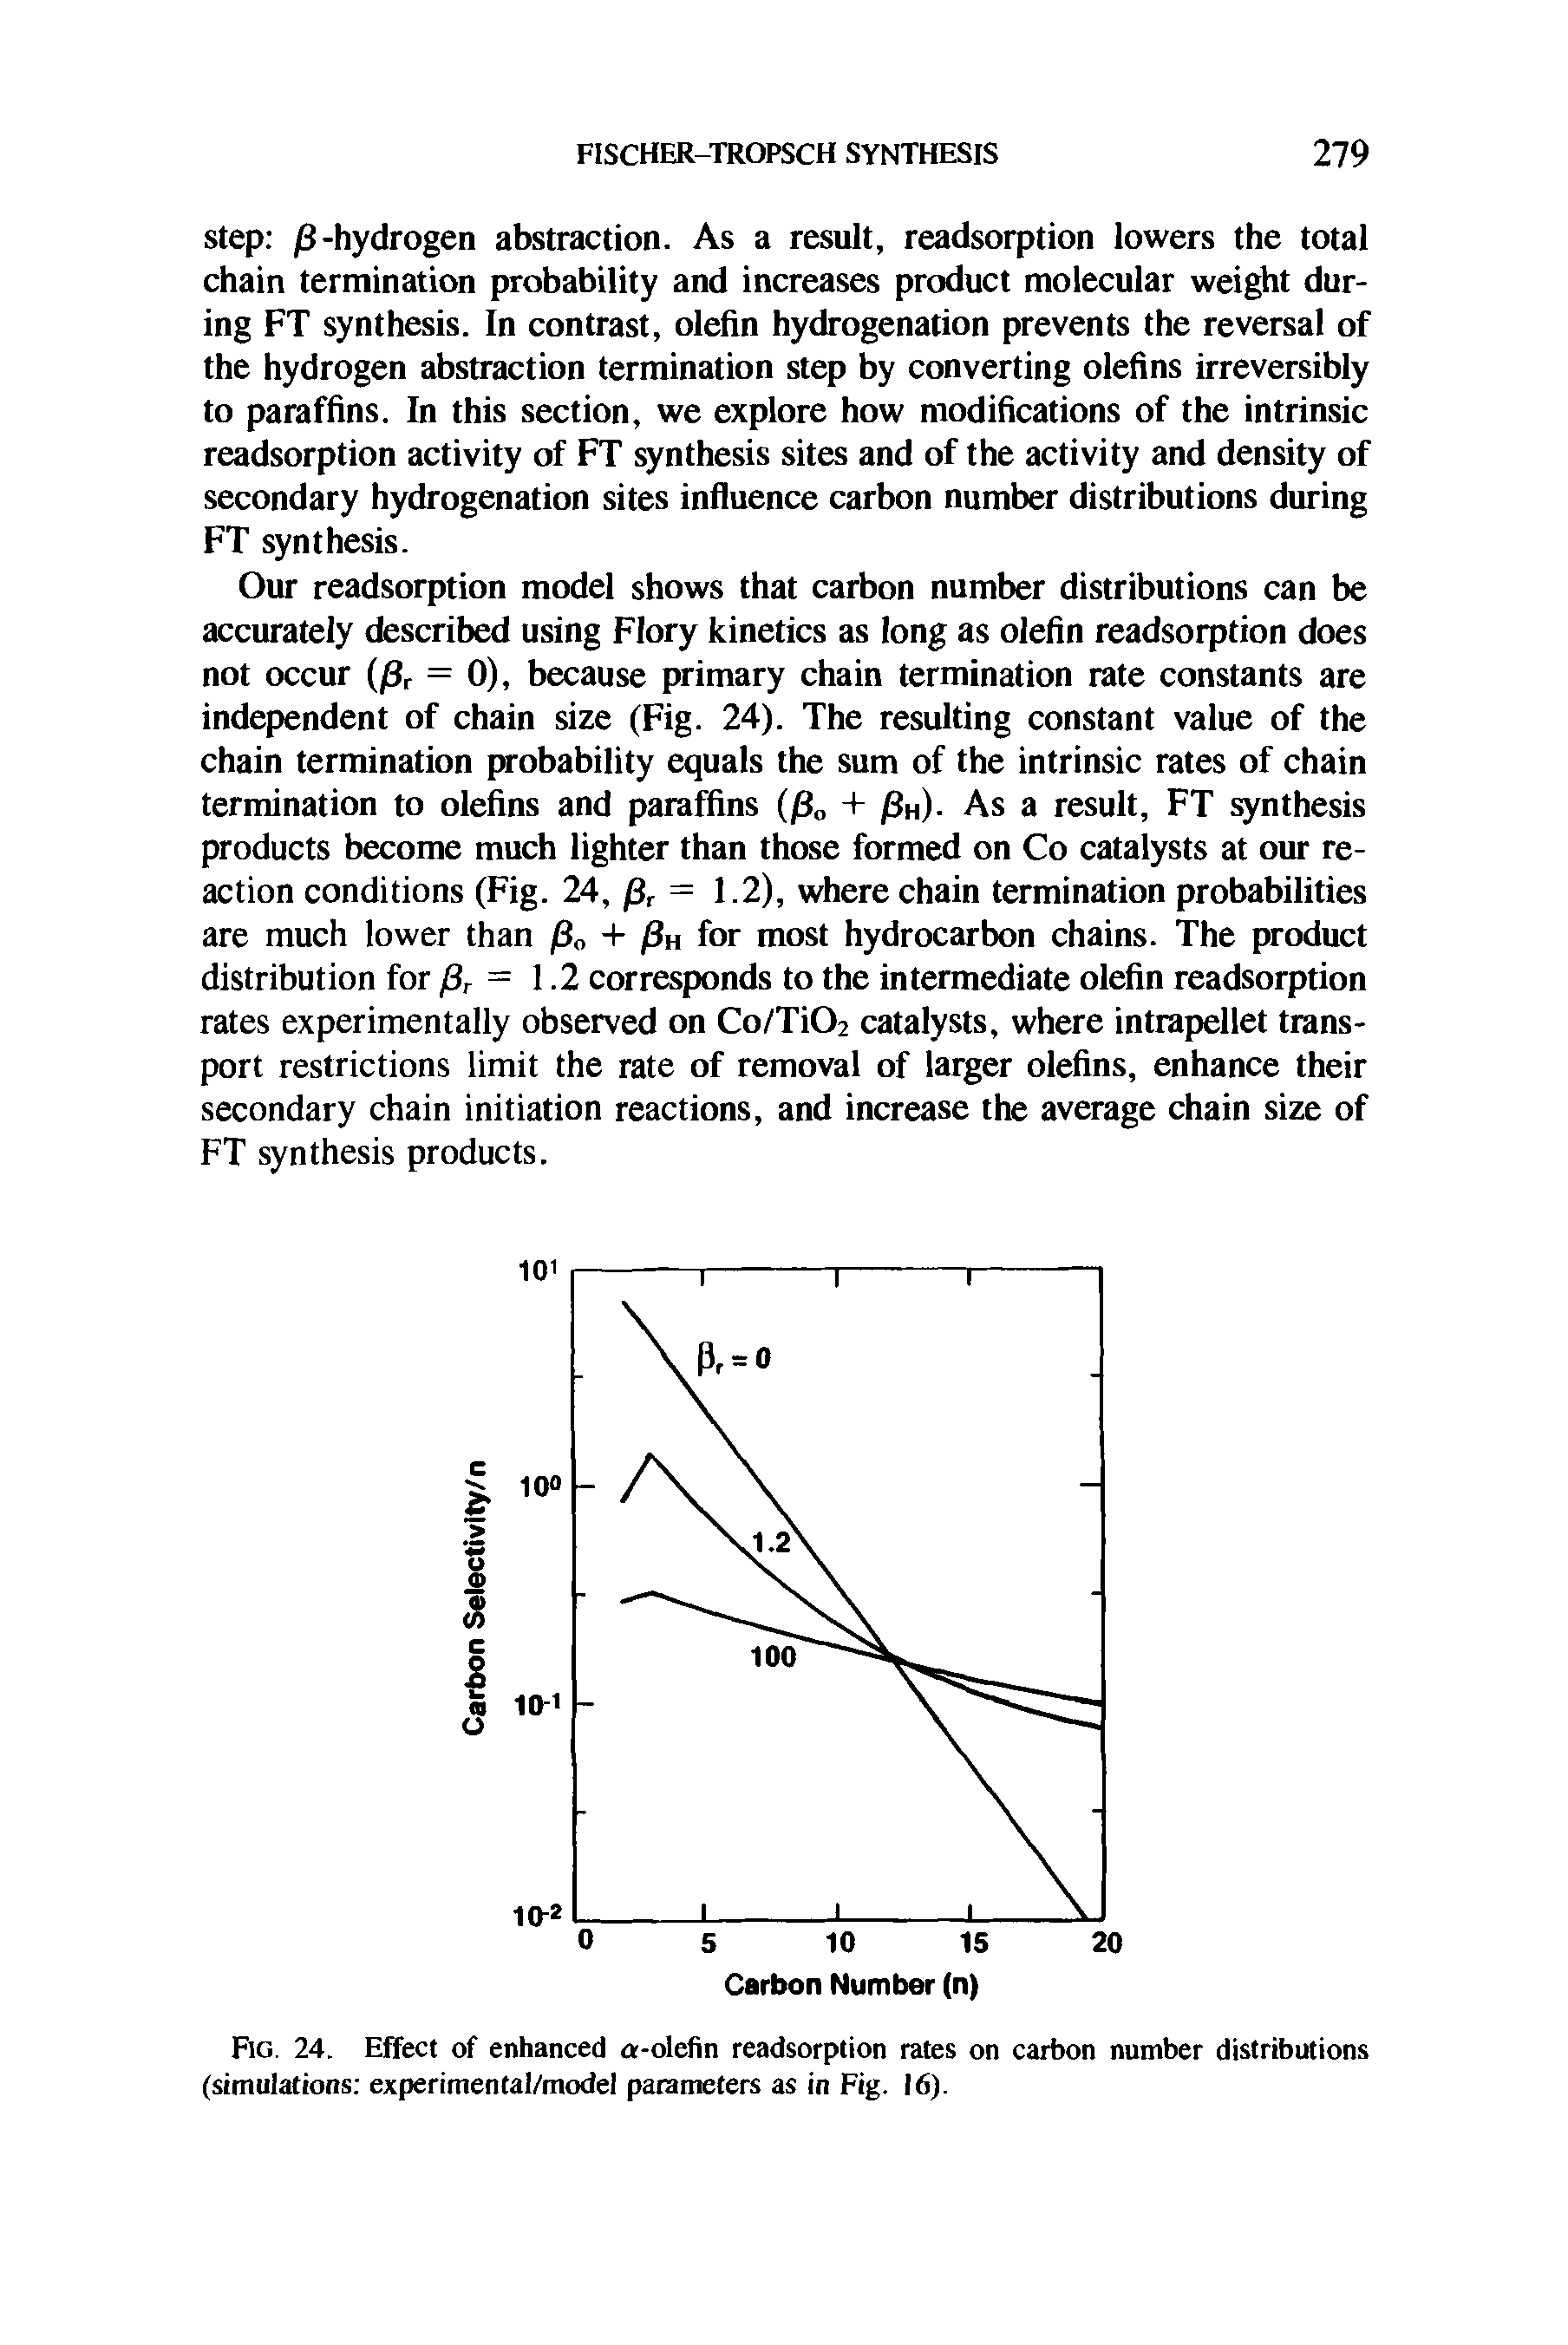 Fig. 24. Effect of enhanced a-olefin readsorption rates on carbon number distributions (simulations experimental/model parameters as in Fig. 16).